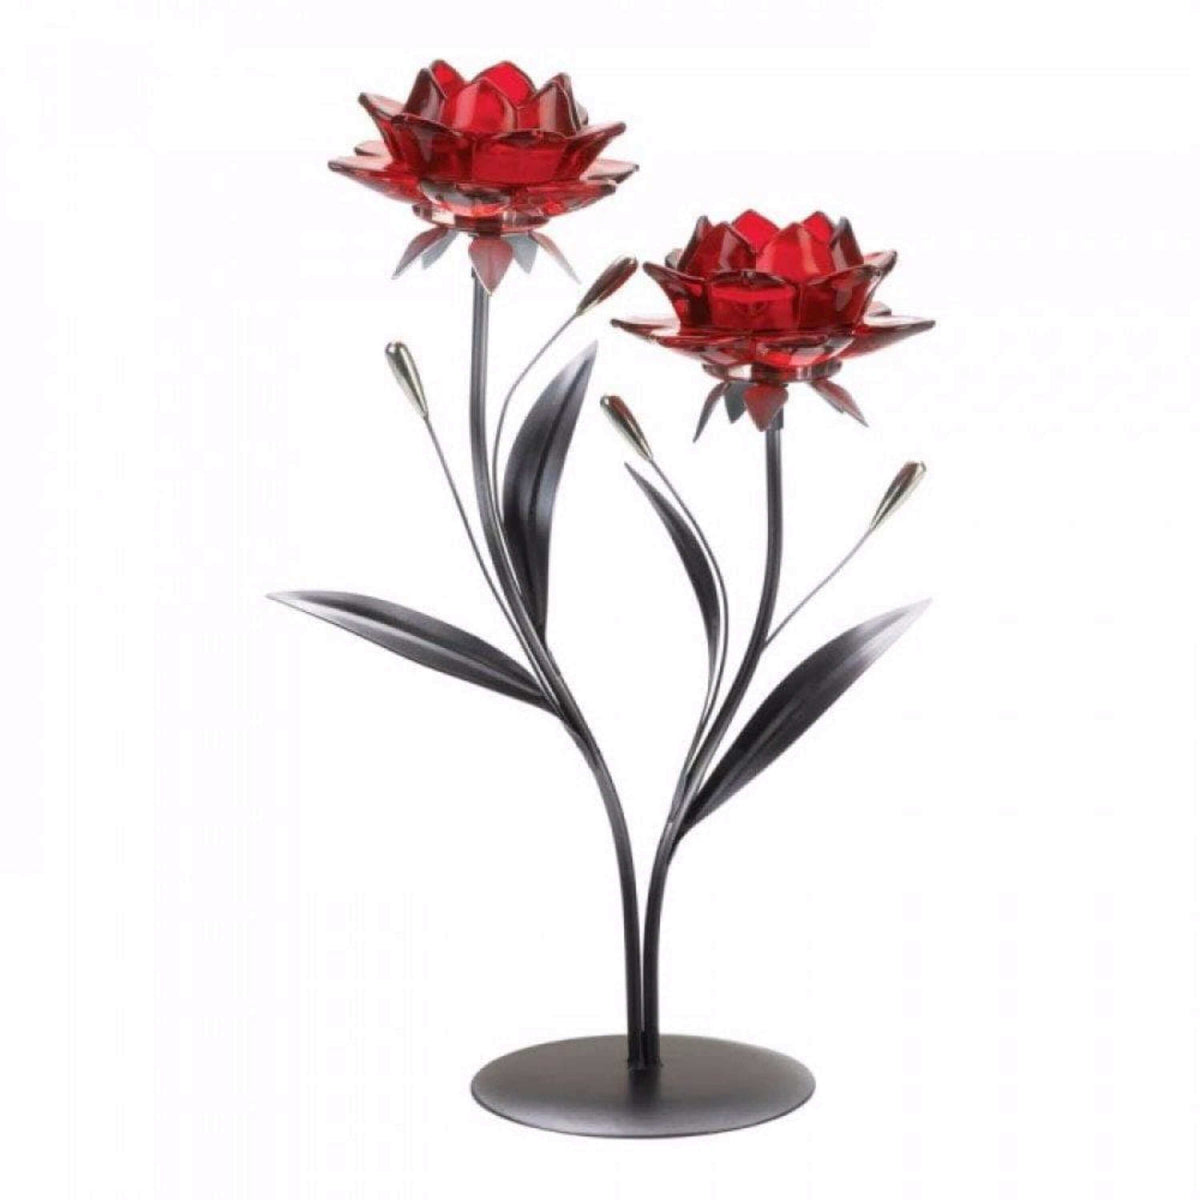 Romantic Red Flowers Candleholder - The House of Awareness